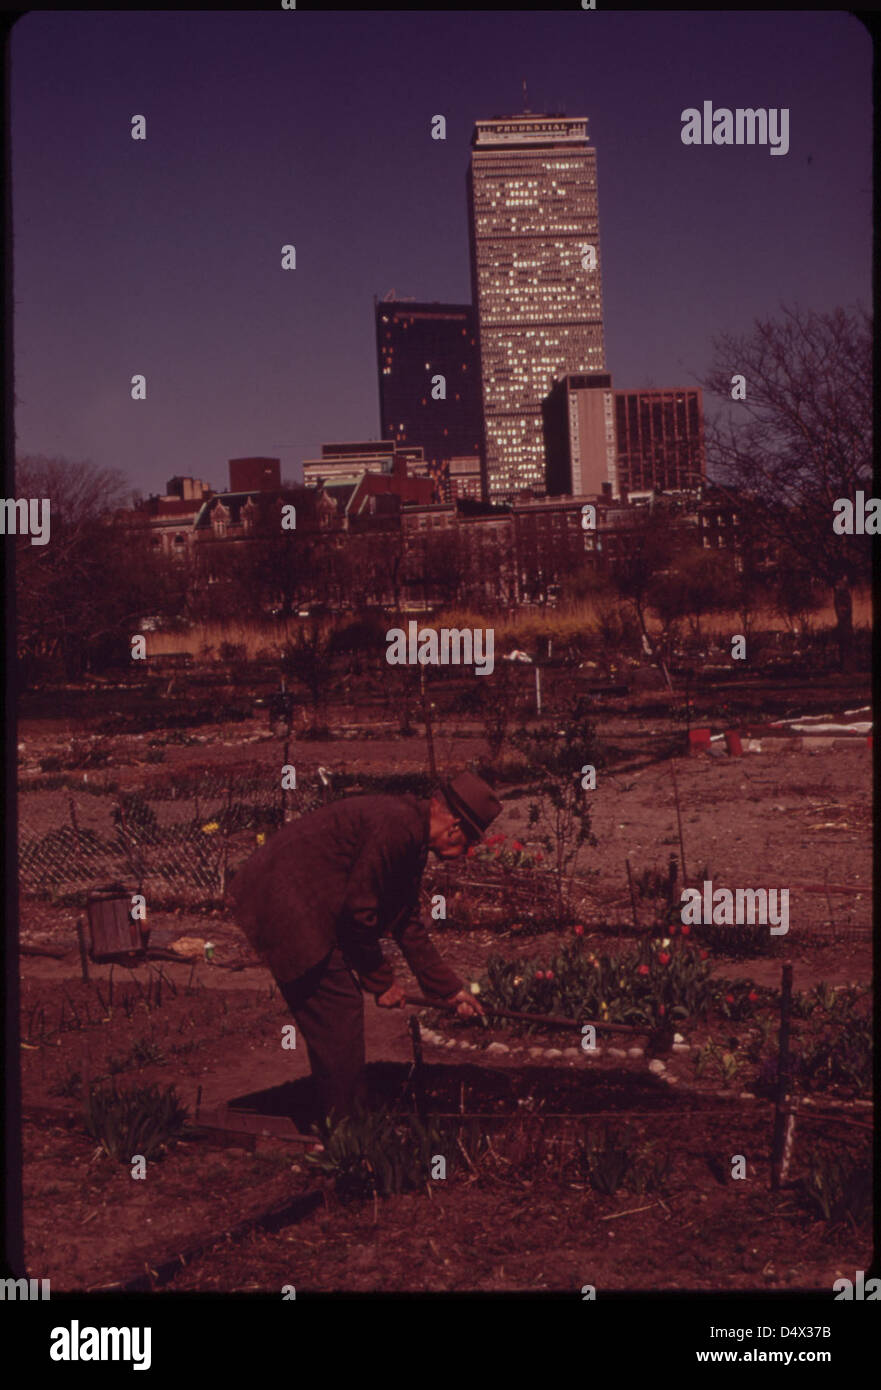 City Farmer Tends His Garden in the Fenway, Administered by 600-Member Fenway Civic Association. Four Hundred Twenty-Five Personal Gardens Are Tilled on These Five Acres in Metropolitan Boston 04/1973 Stock Photo